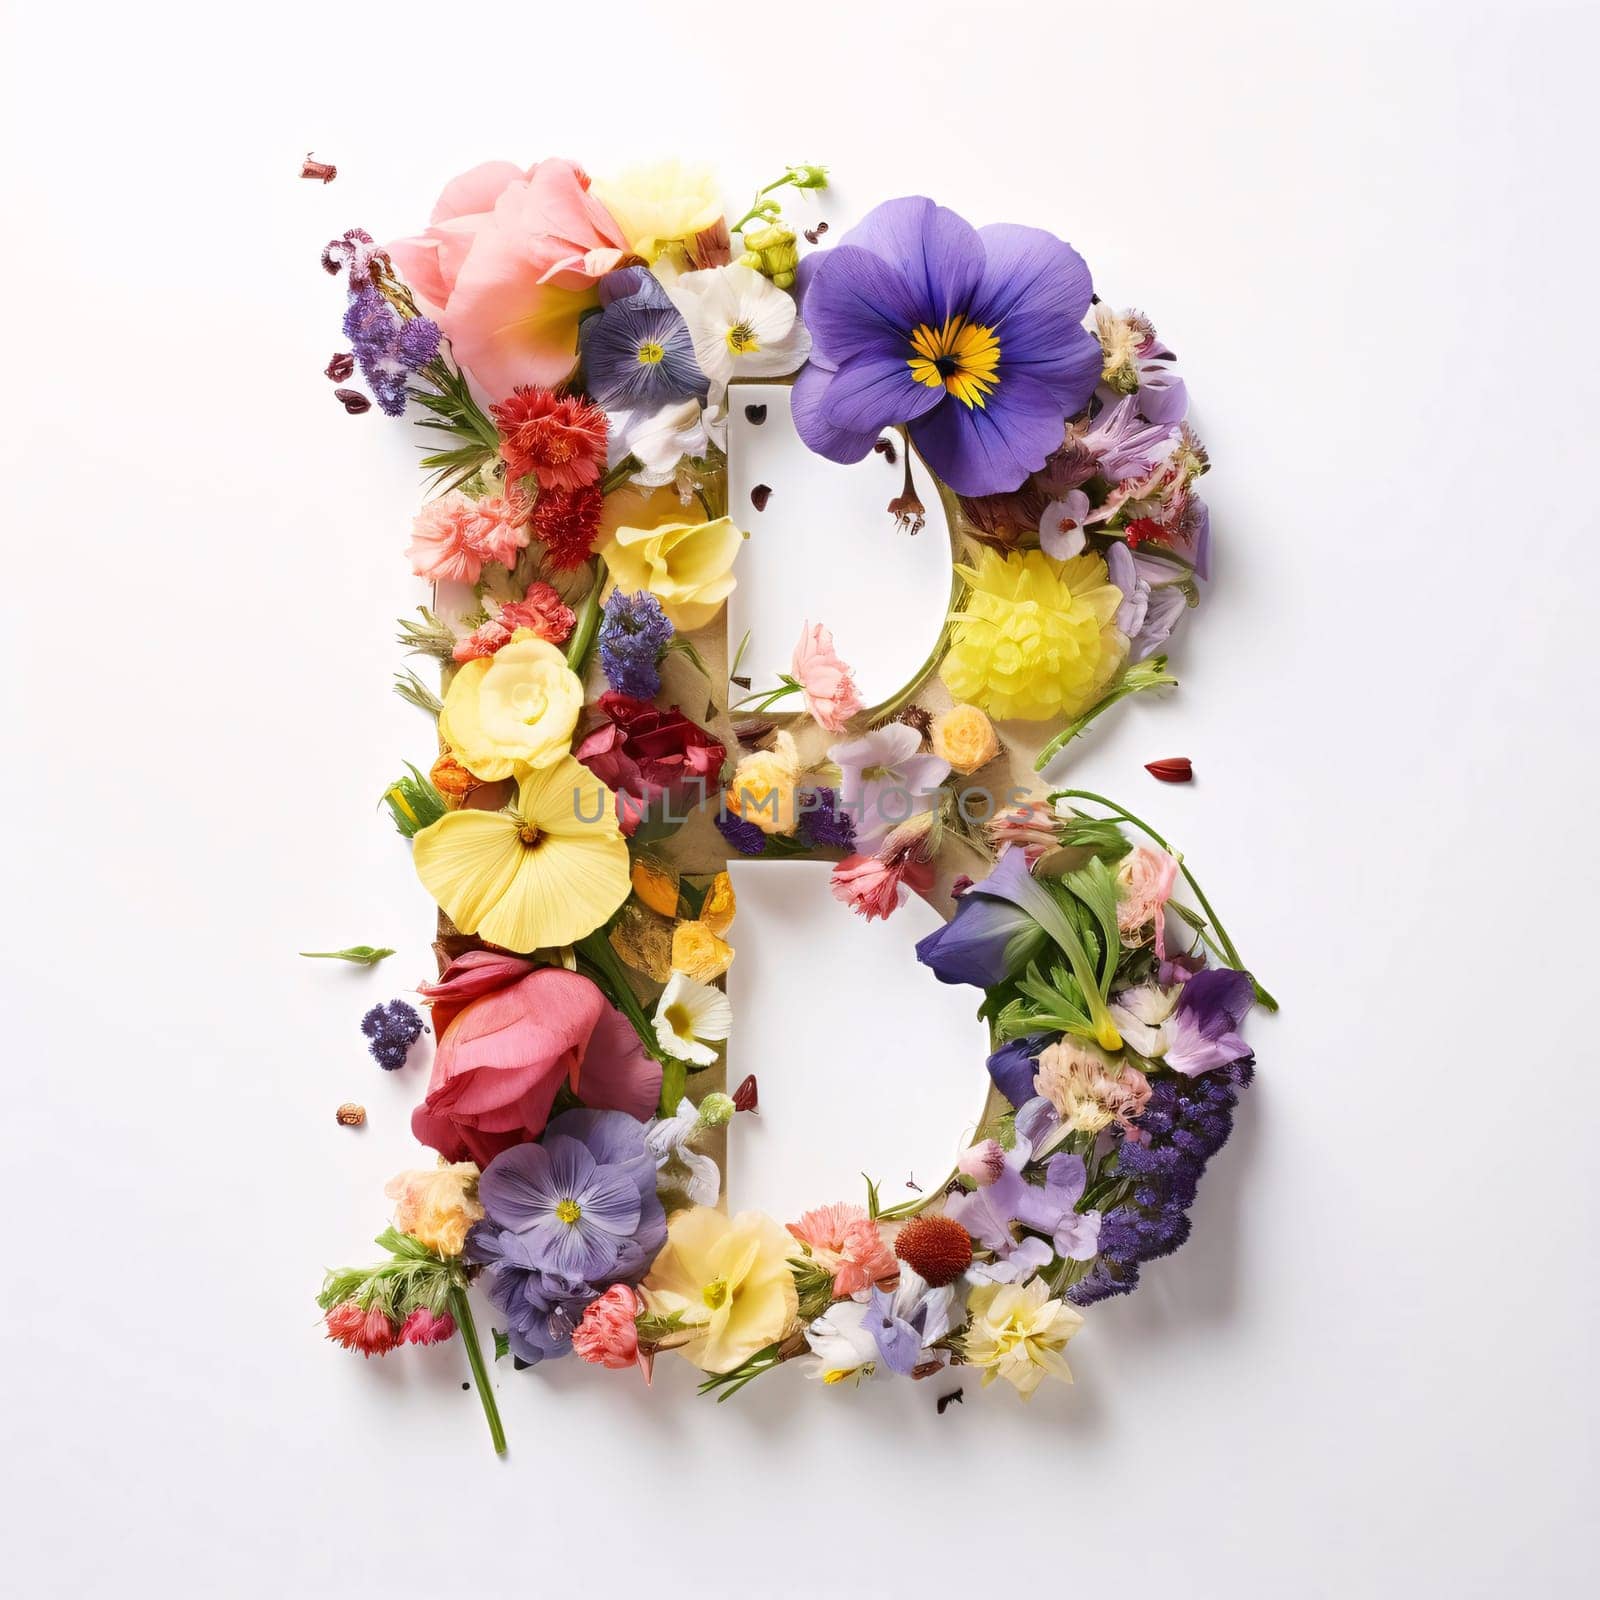 Graphic alphabet letters: Letter B made of flowers on white background. Alphabet made of flowers